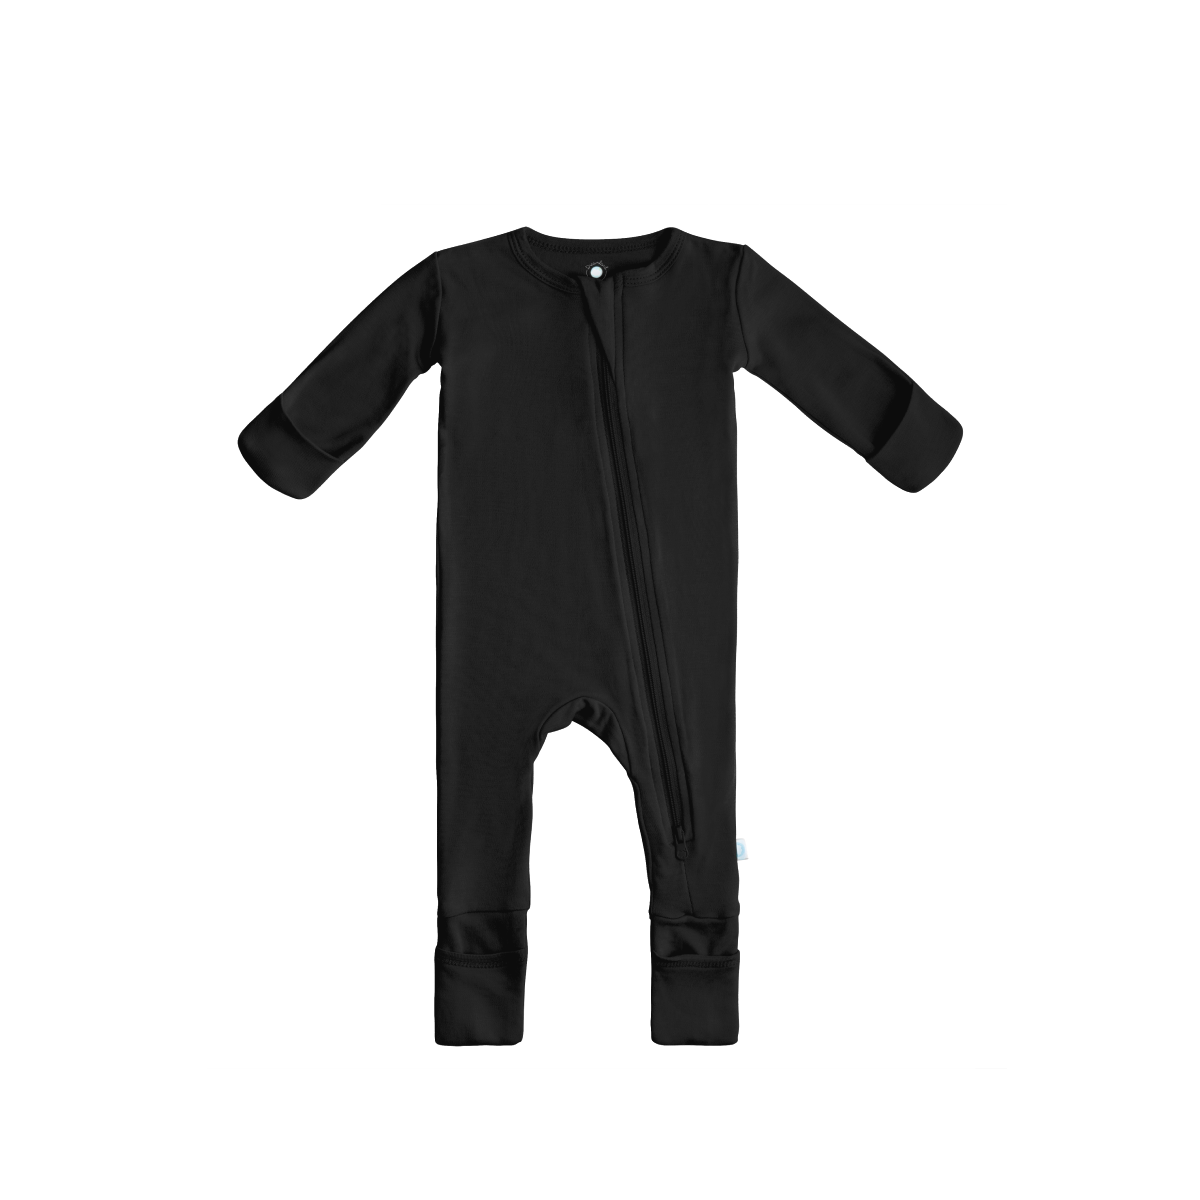 Baby Bamboo Pajamas w/ DreamCuffs - 11 Solids